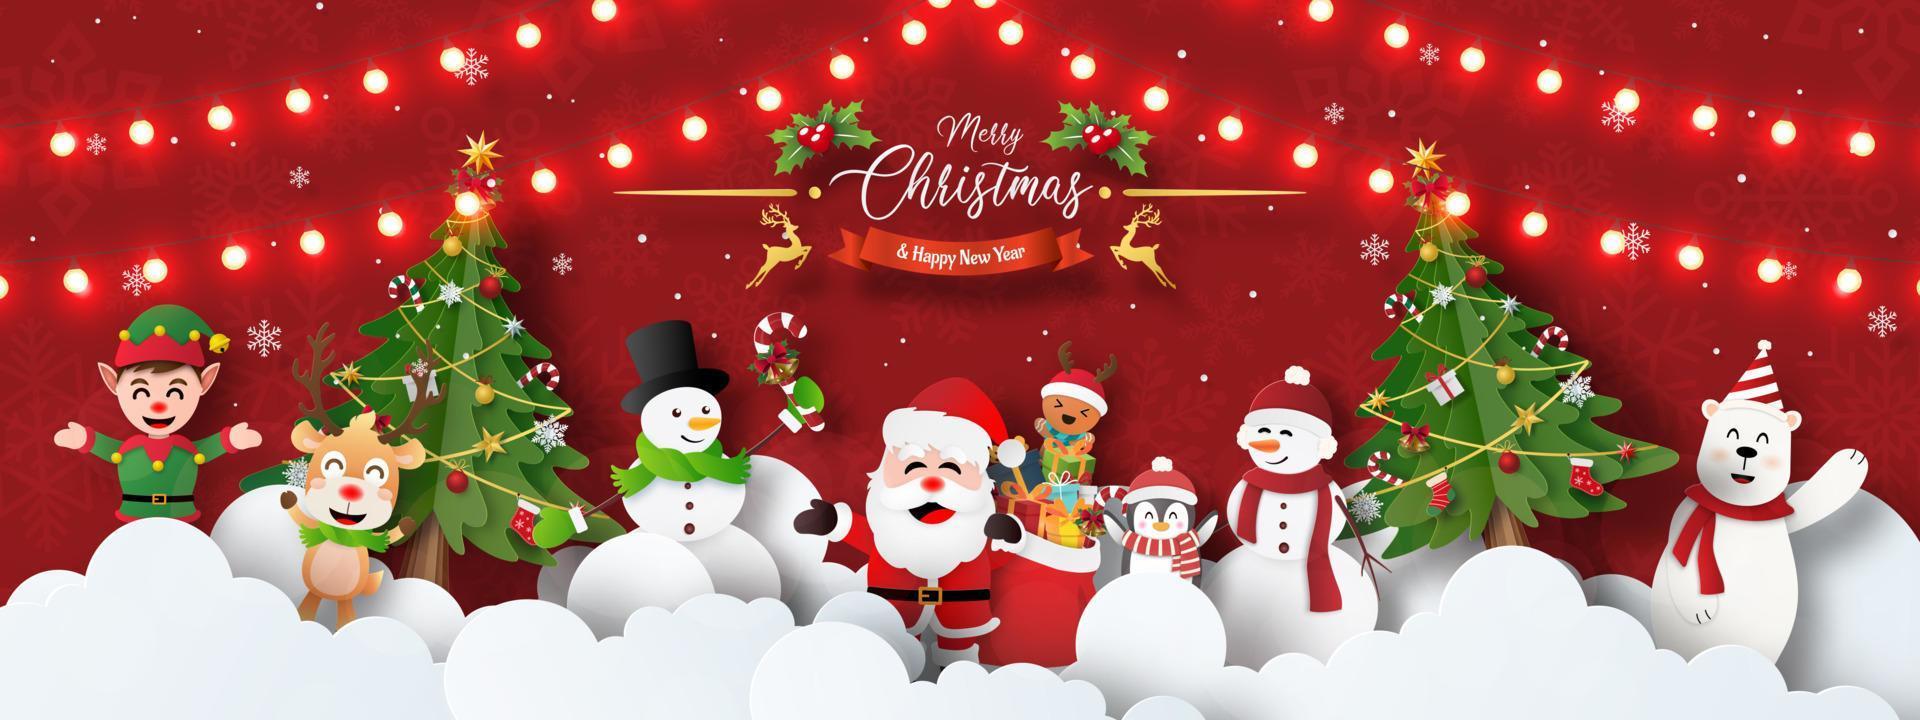 Merry Christmas and Happy New Year, Christmas banner postcard of Christmas party with Santa Claus and friends on the sky vector